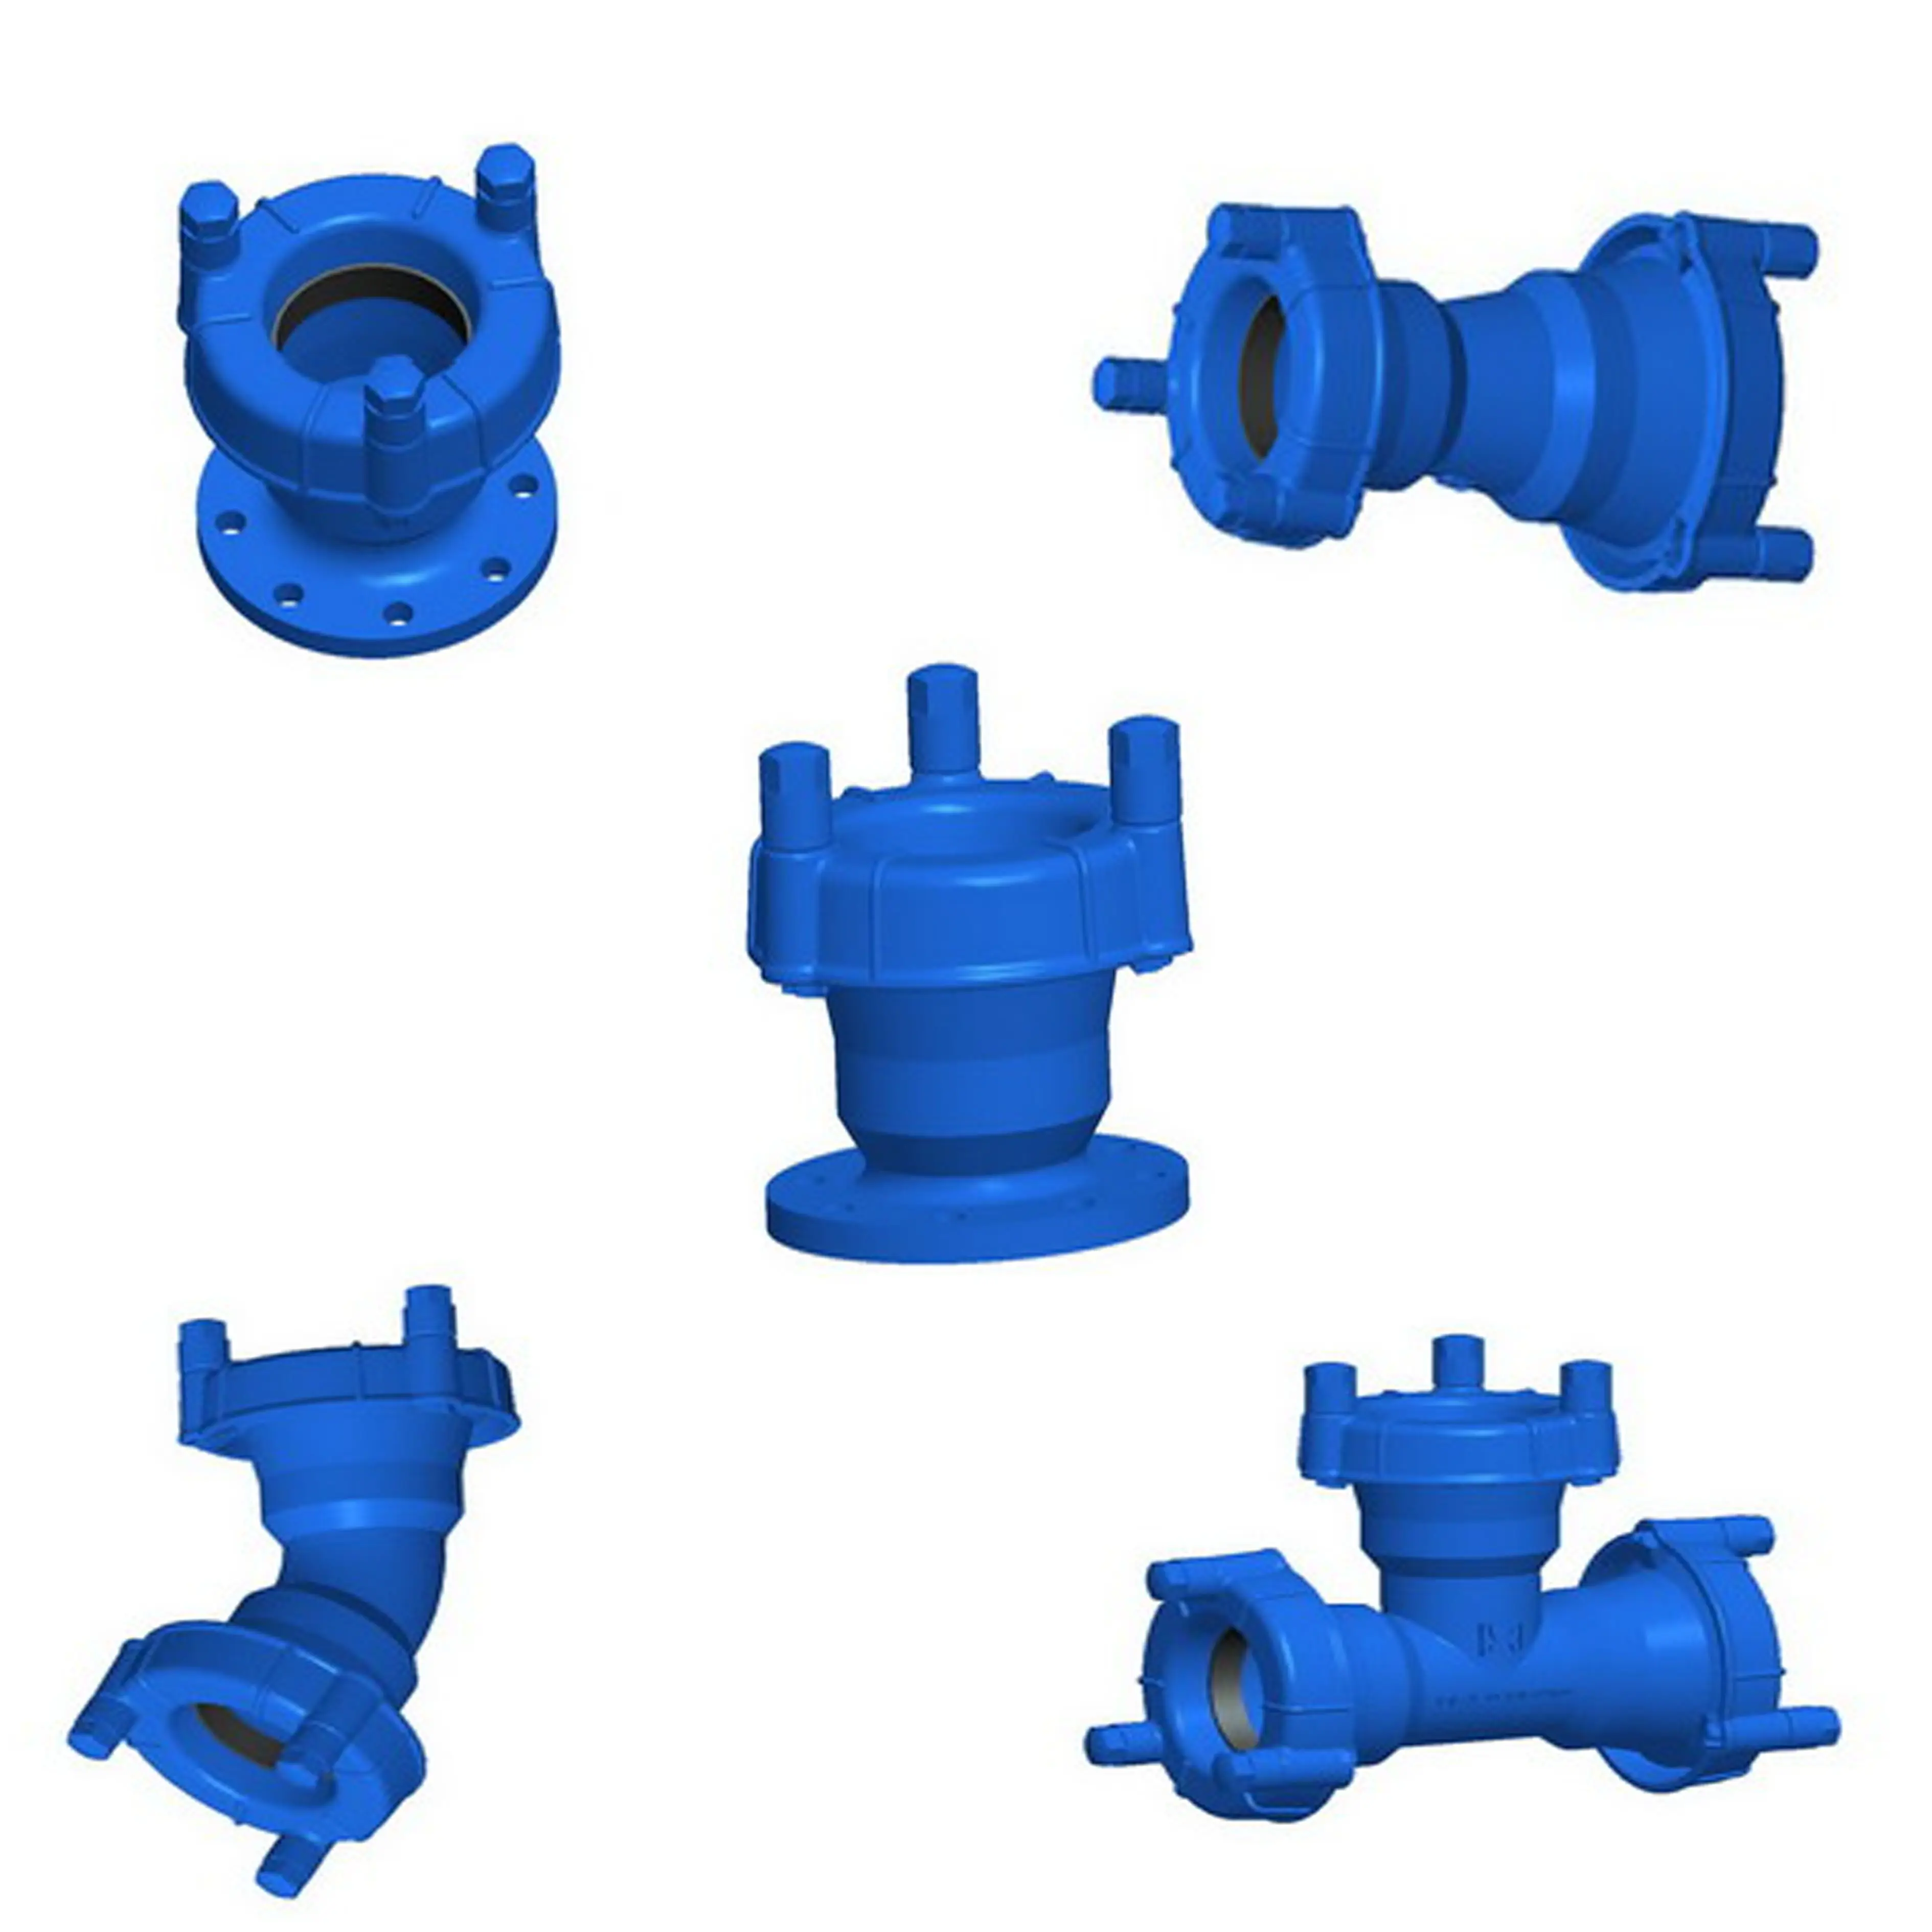 DN80-2600 Ductile Iron Pipe Fittings